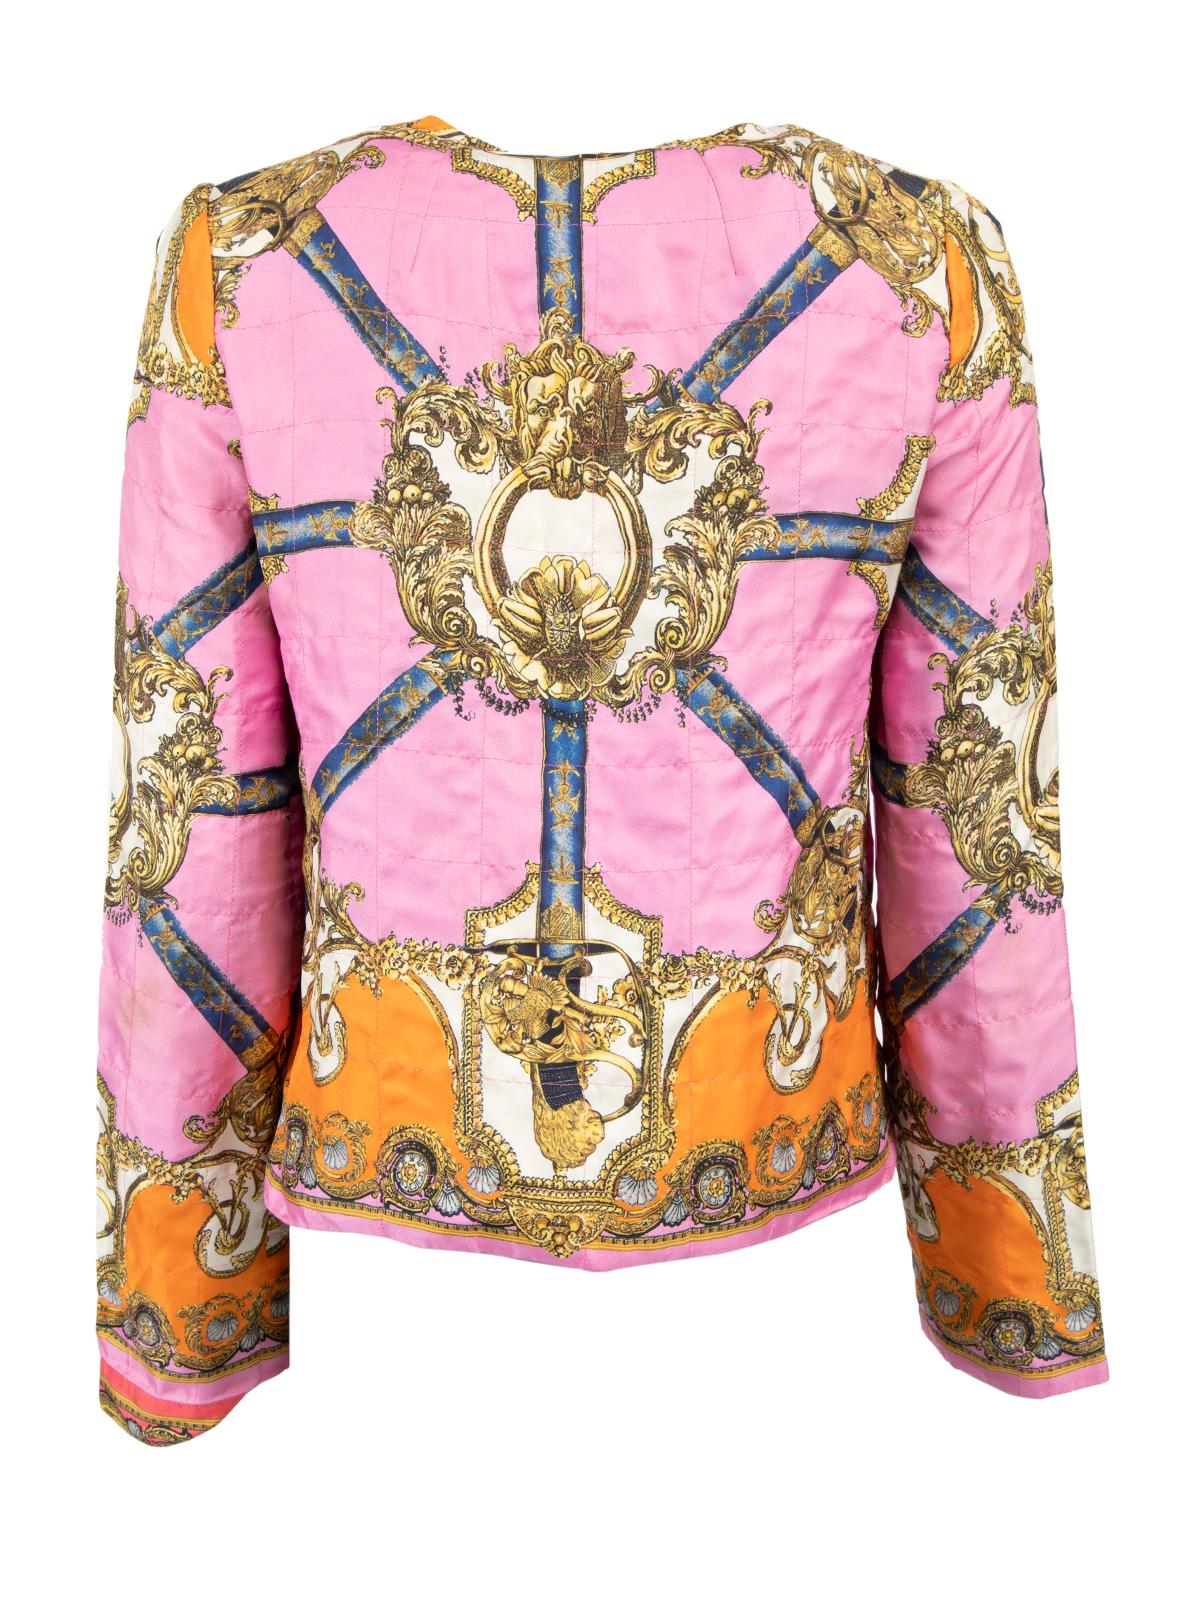 Dolce & Gabbana Women's Multicolour Lightweight Jacket with Pockets In Good Condition For Sale In London, GB